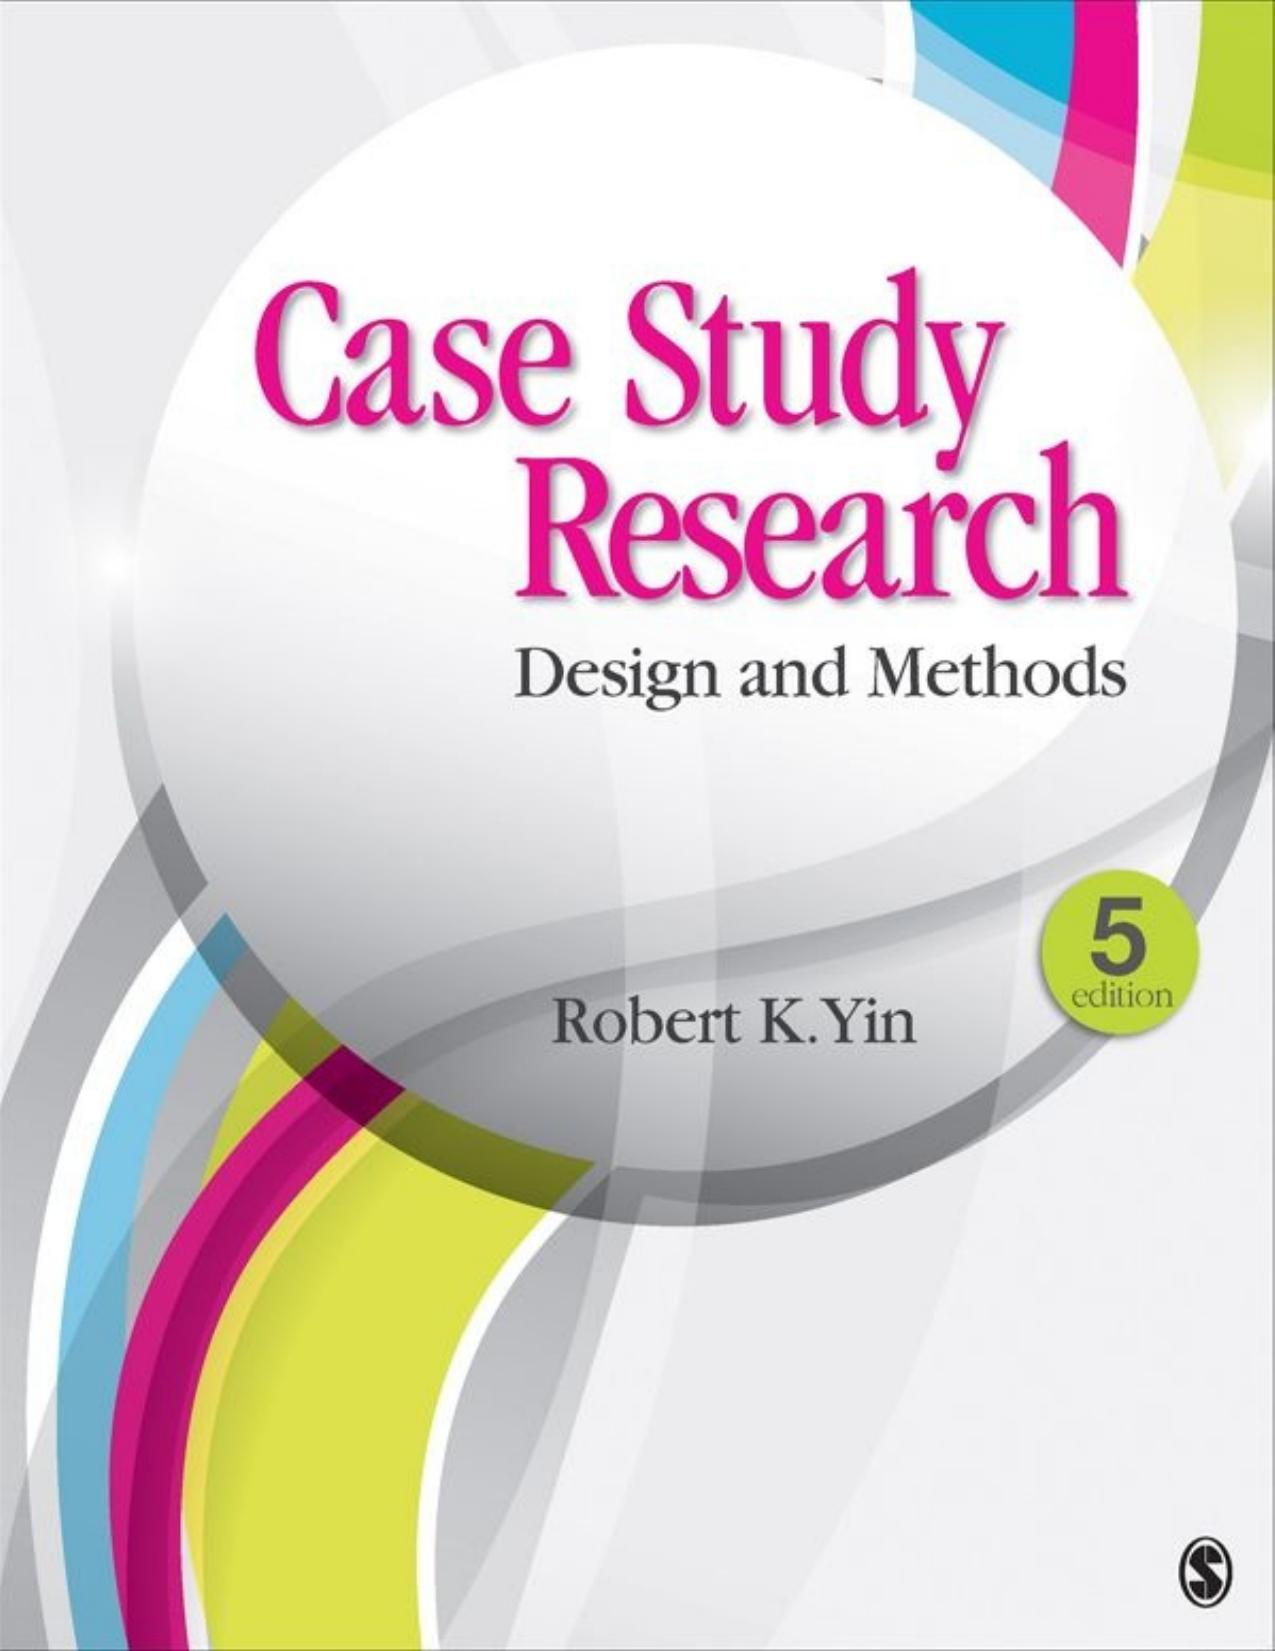 Case Study Research Design and Methods 5th Fifth Edition 5e.jpg